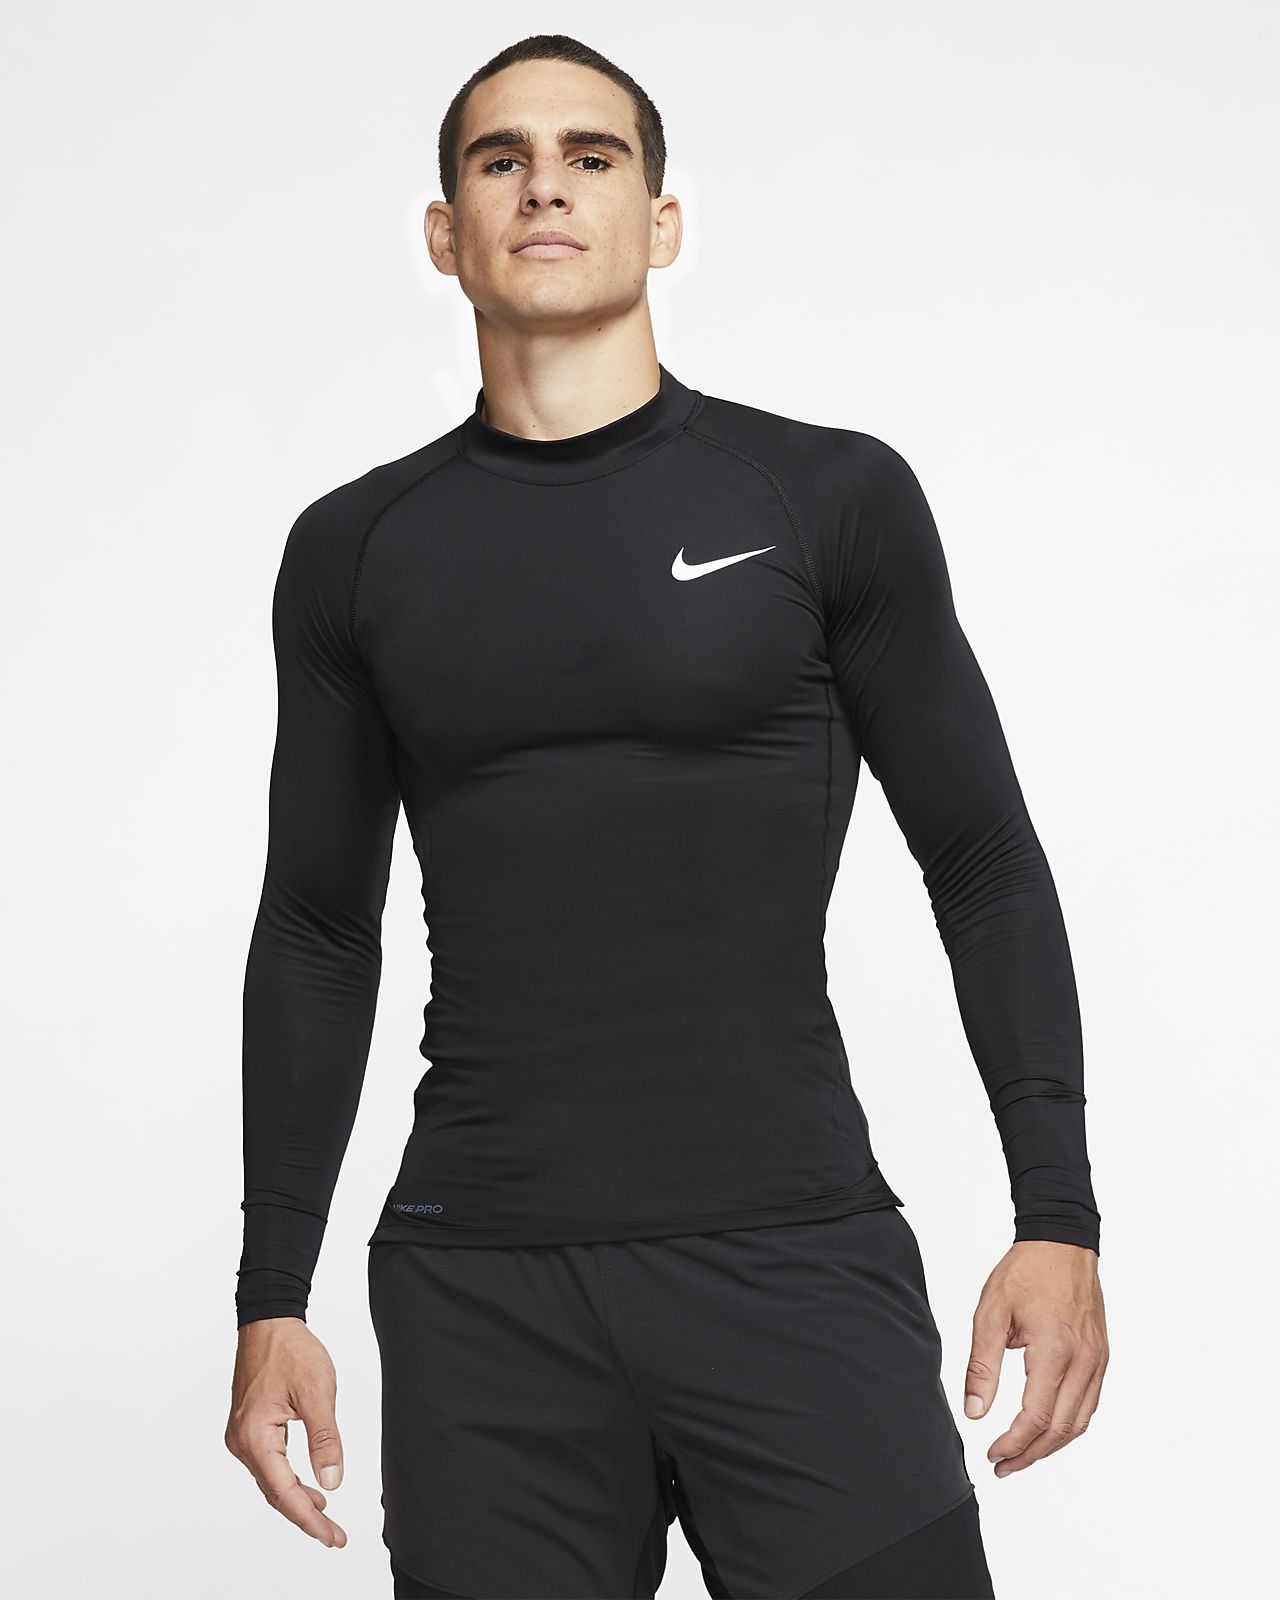 nike compression top mens Sale,up to 71% Discounts